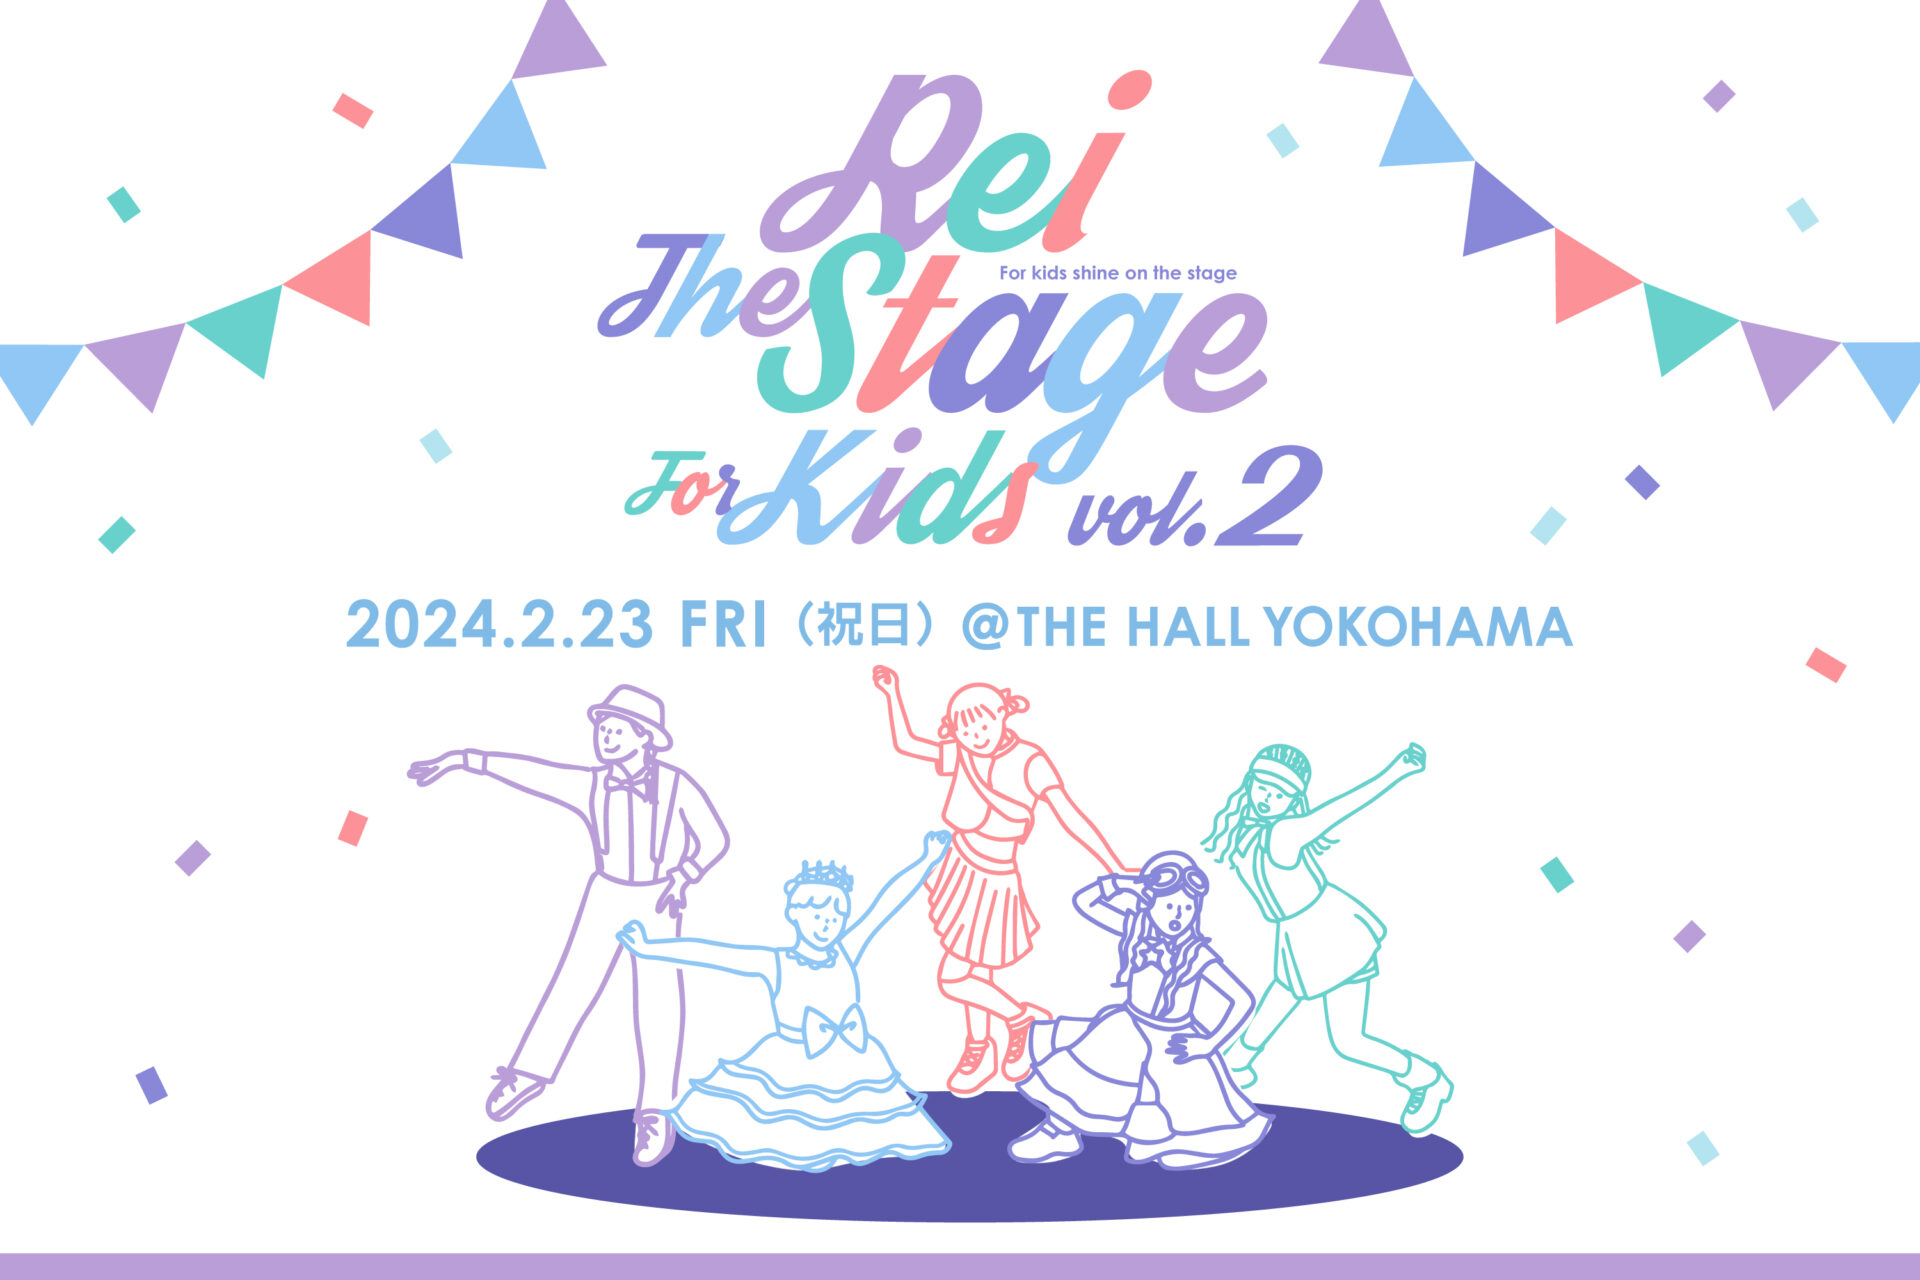 Rei The Stage for KIDS vol.2